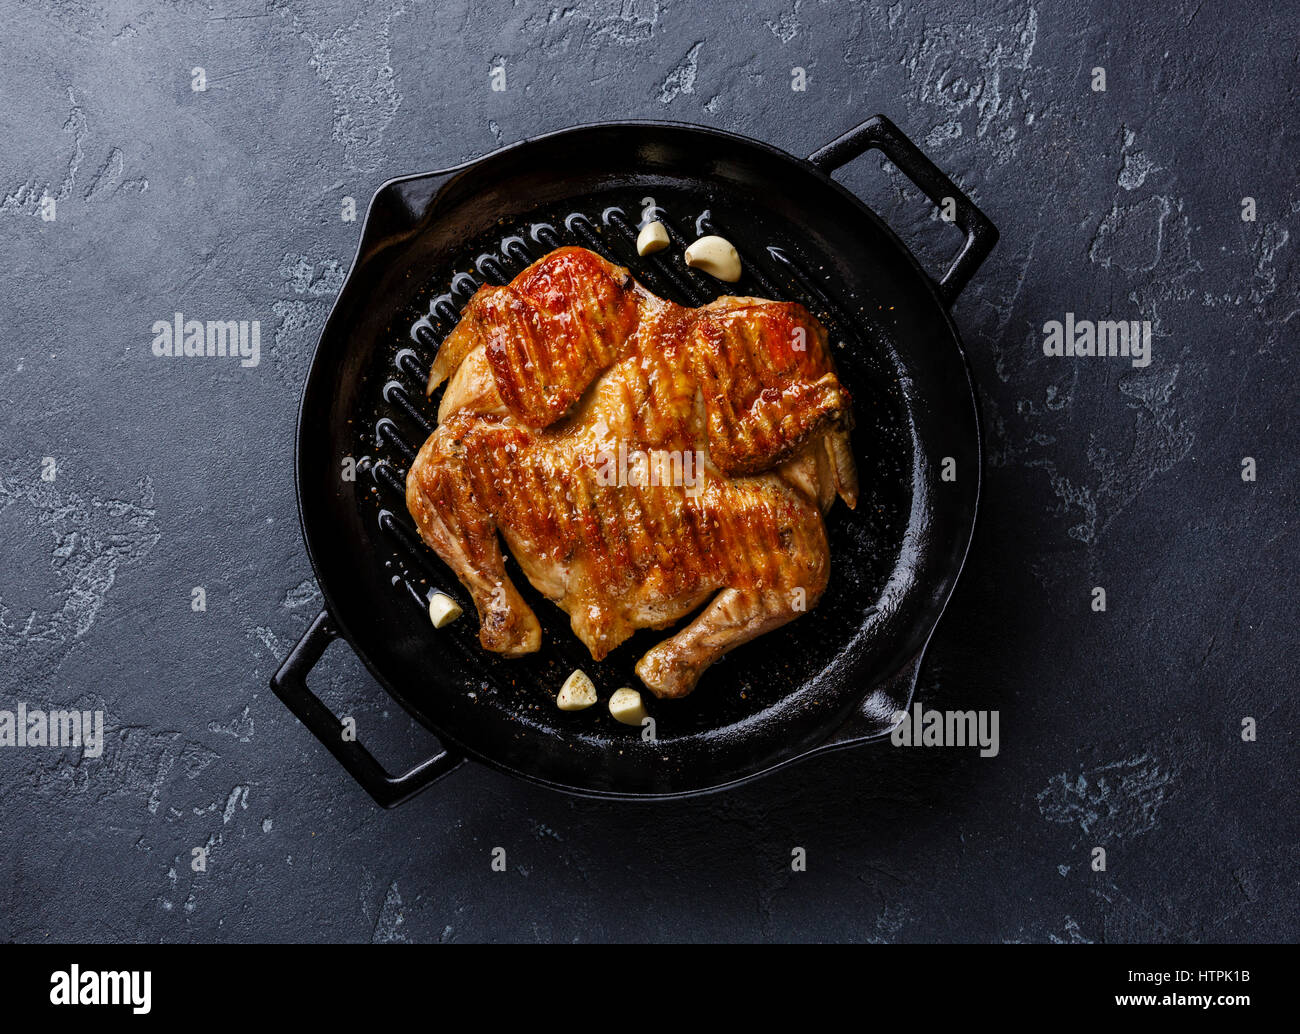 Grilled fried roast Chicken Tabaka in frying pan on dark stone background Stock Photo